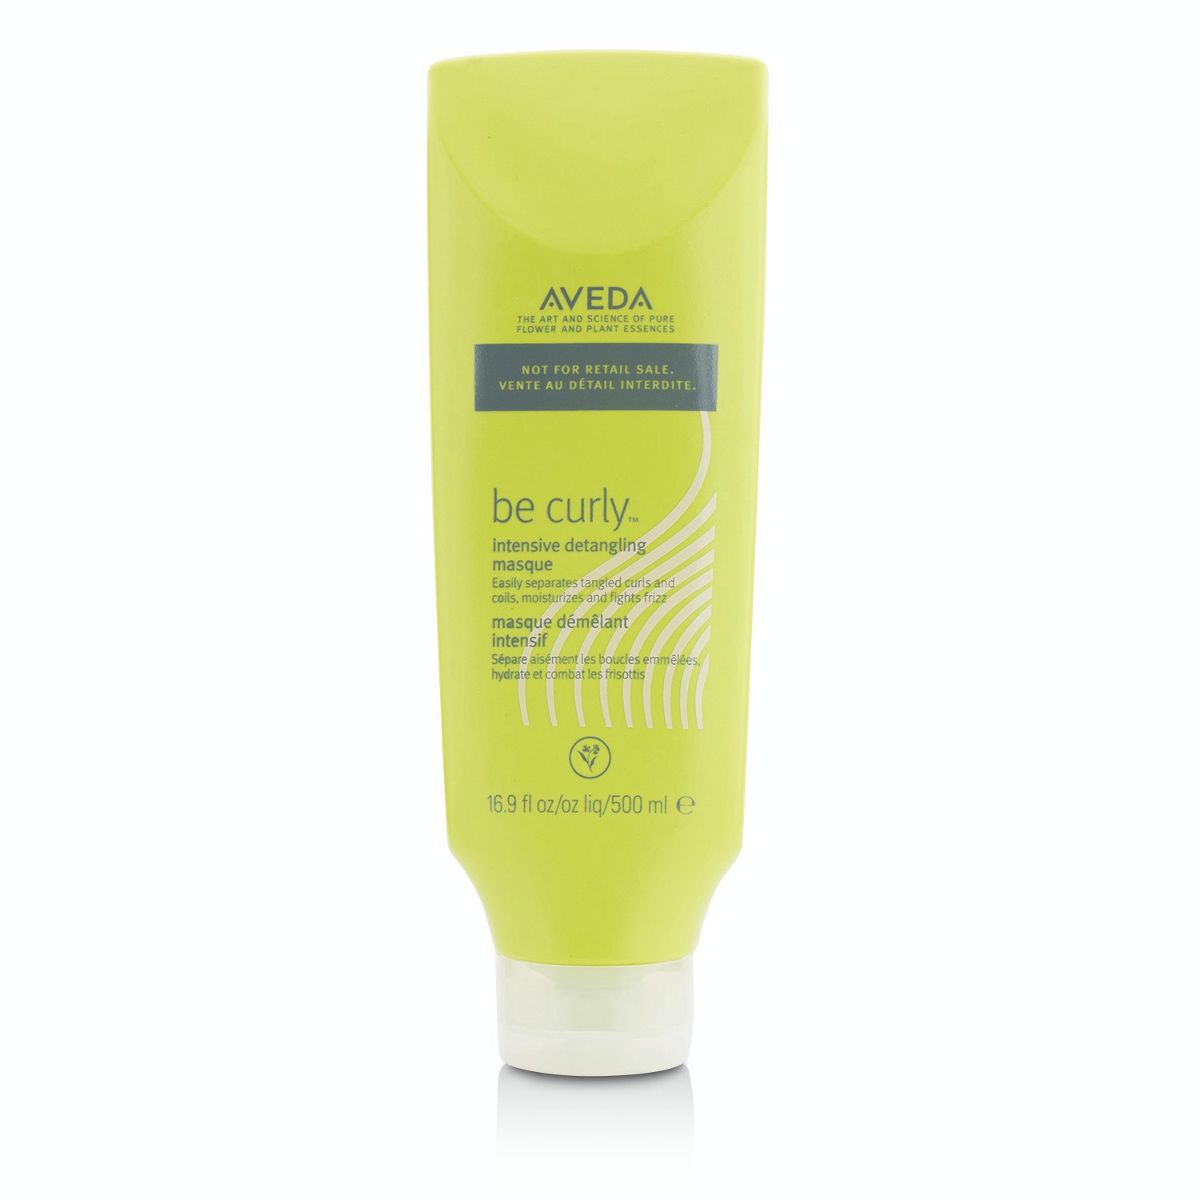 Be Curly Intensive Detangling Masque Aveda Image